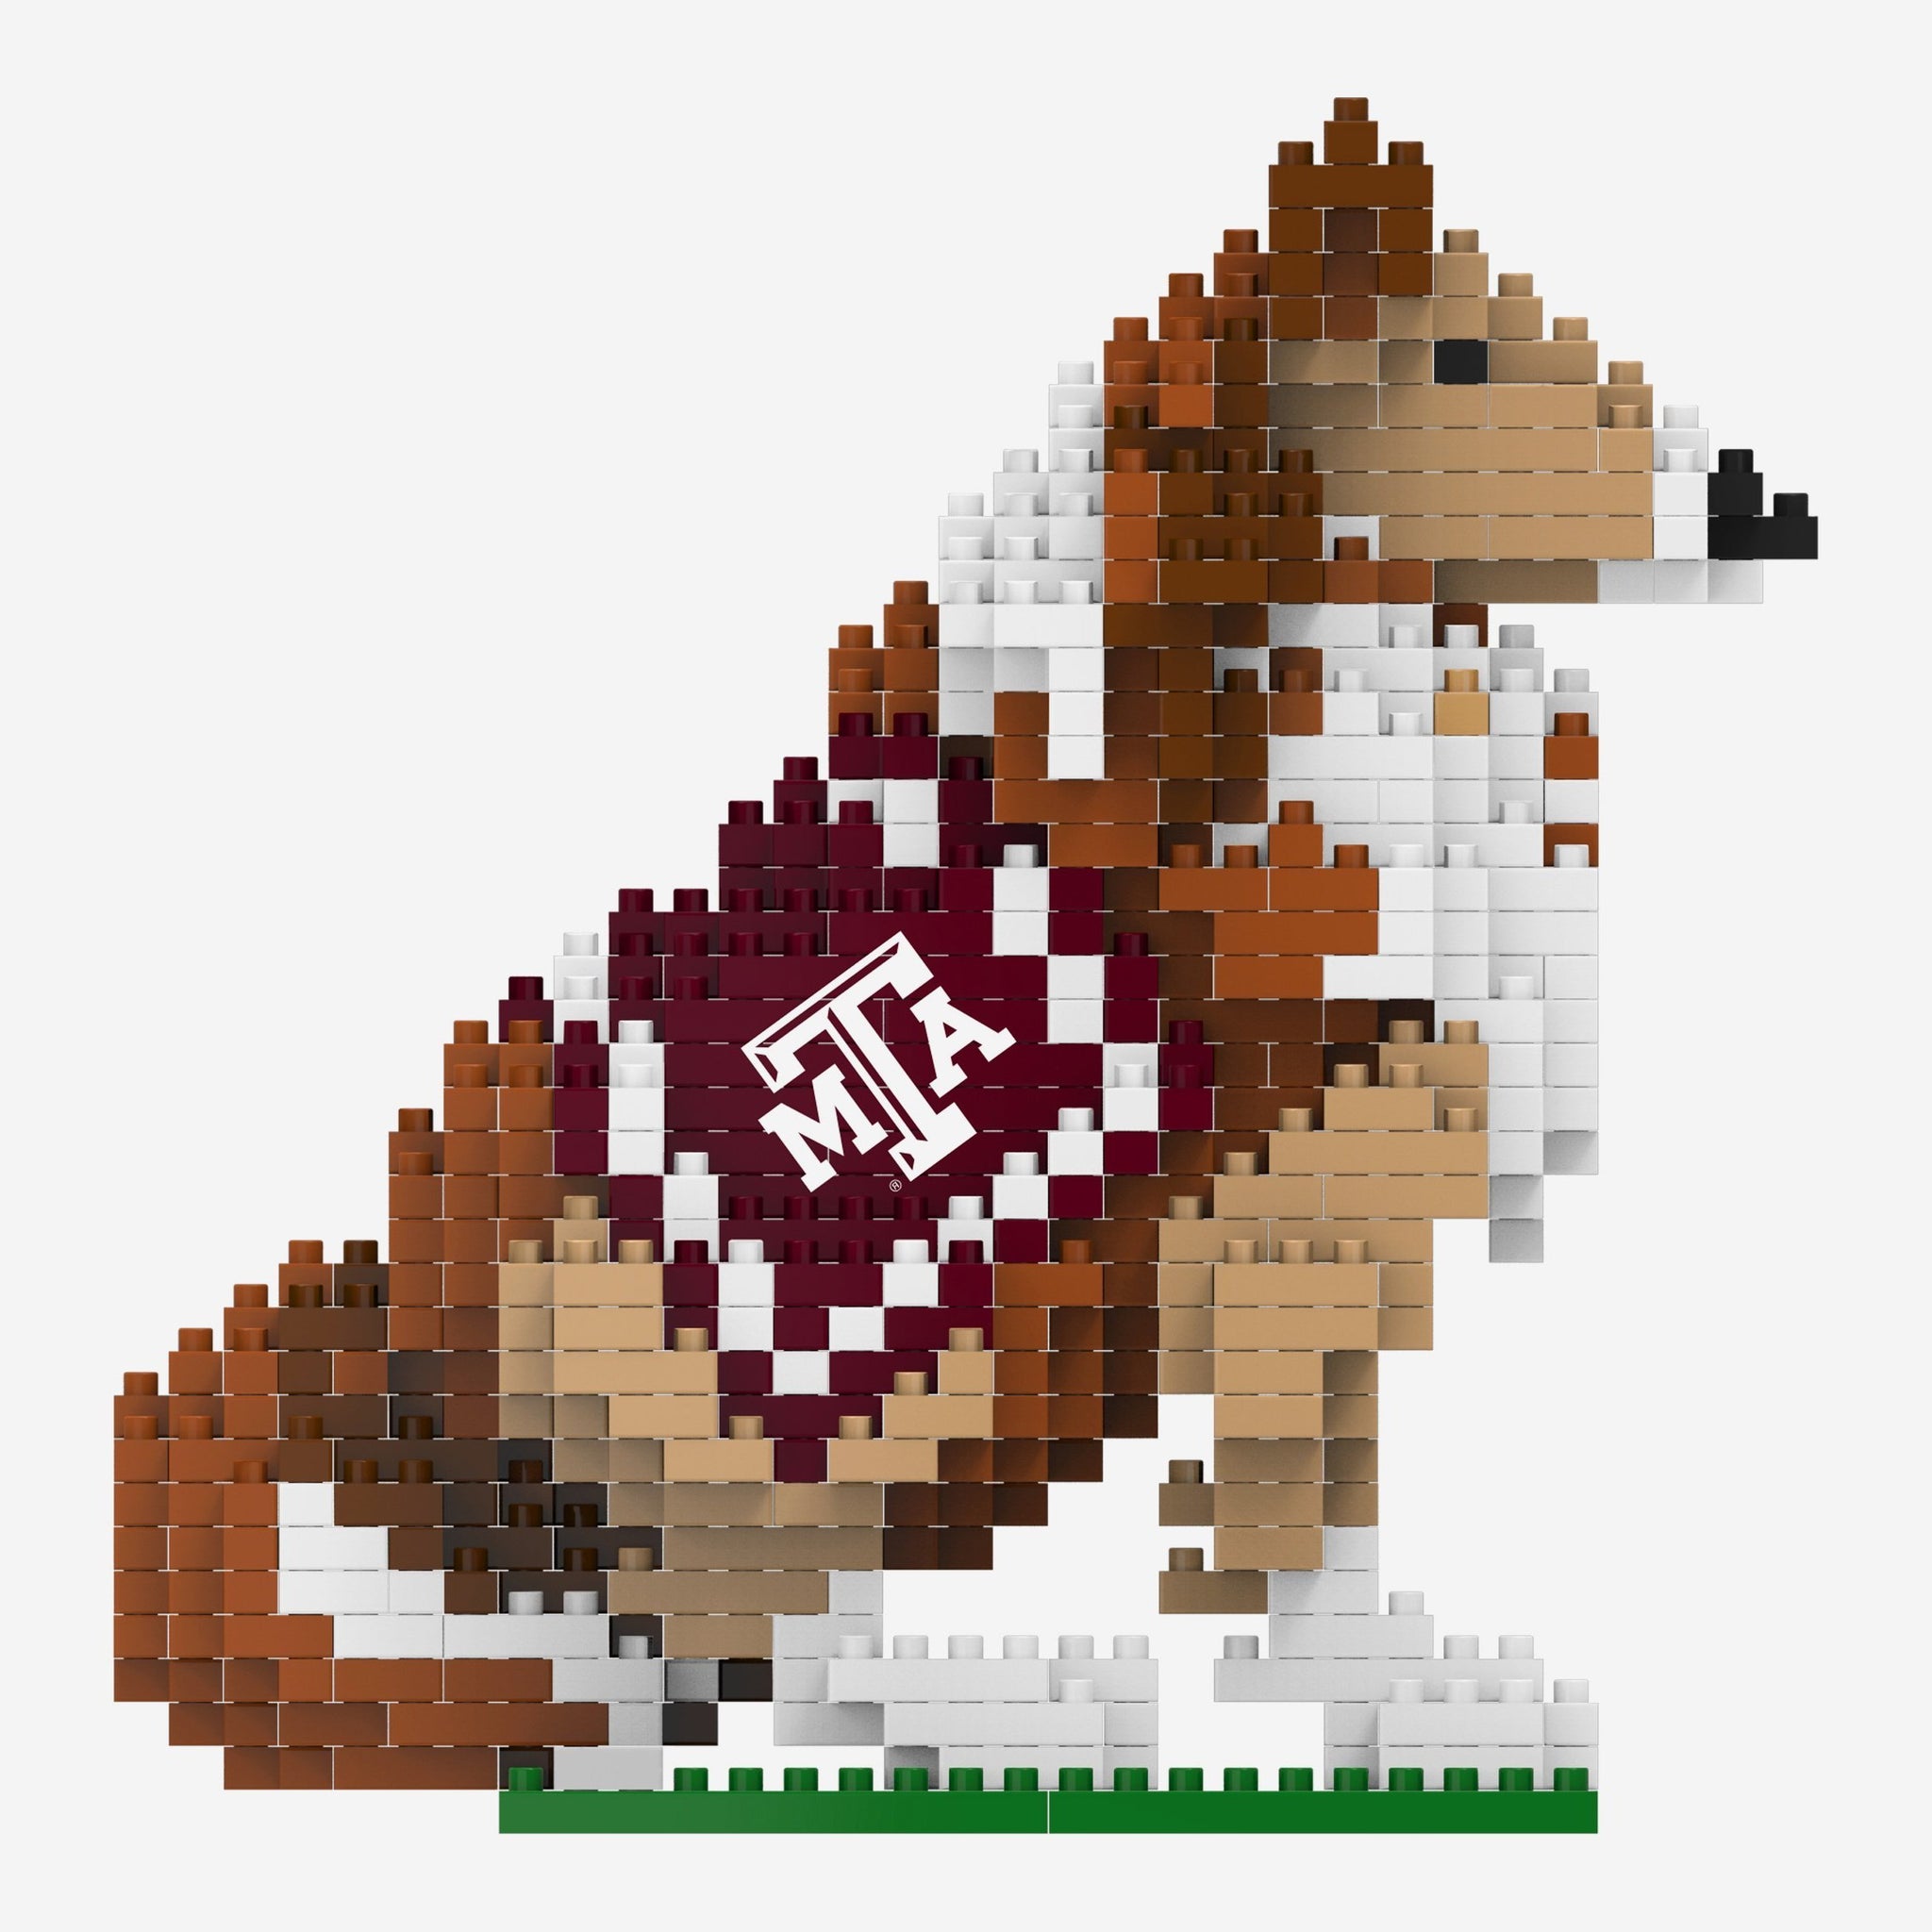 Texas A&M unveils Reveille X to the world